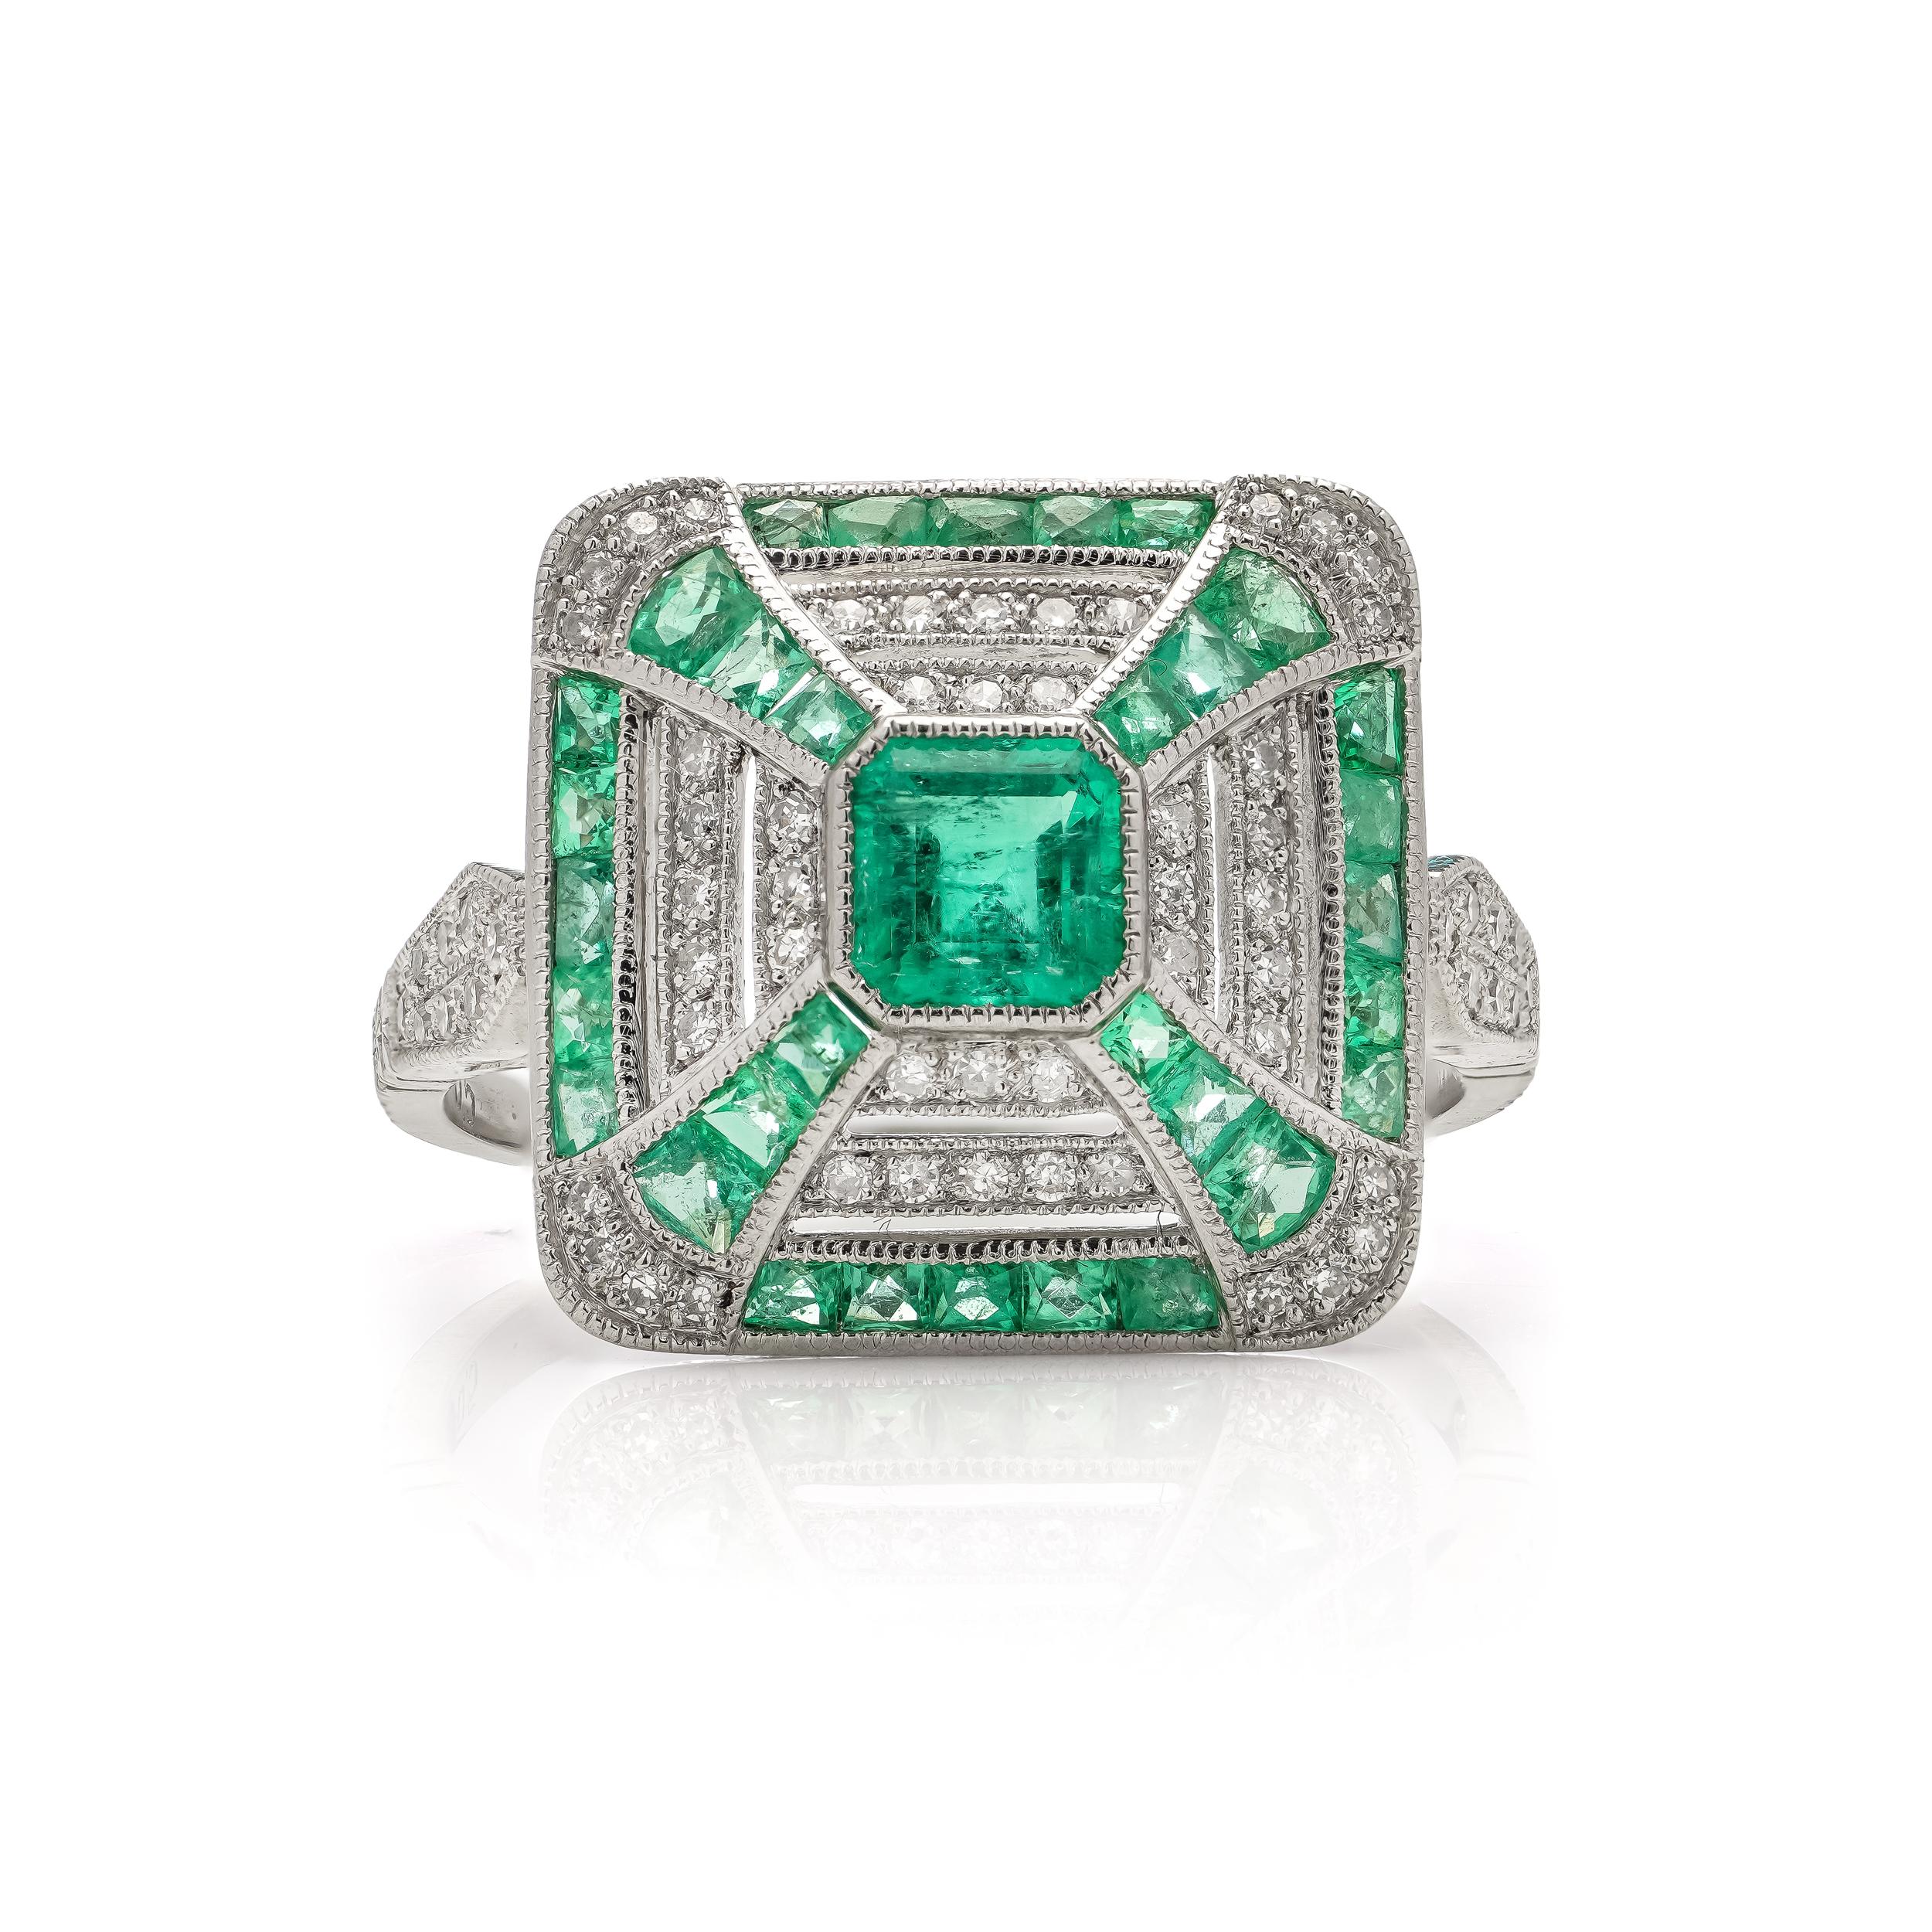 Emerald Cut Platinum Art Deco-inspired 0.42 carats of Emerald fashion ring For Sale